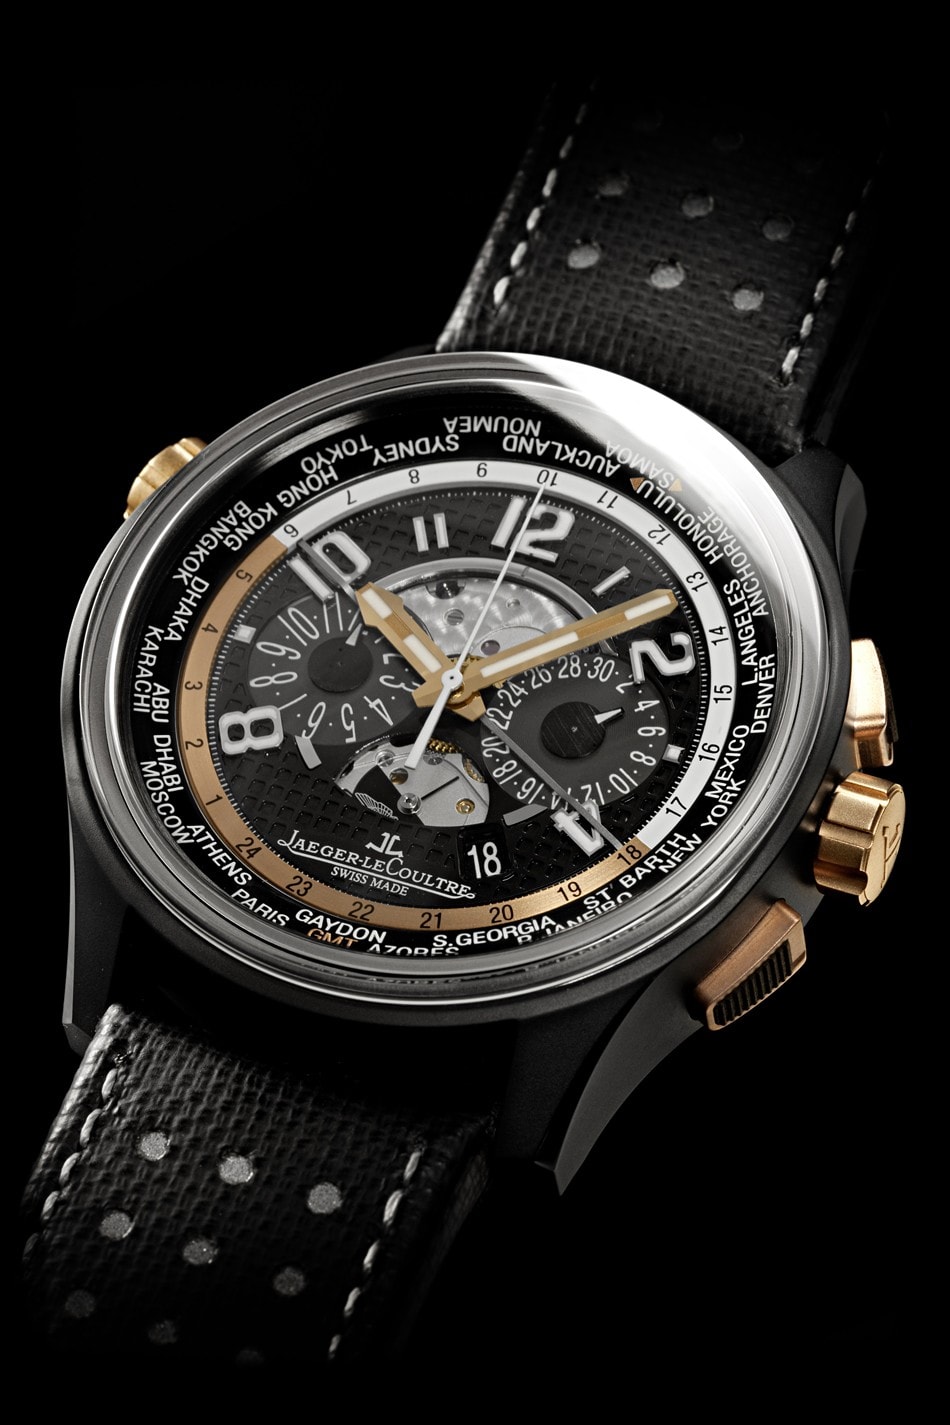 The AMVOX5 World Chronograph from Jaeger-LeCoultre